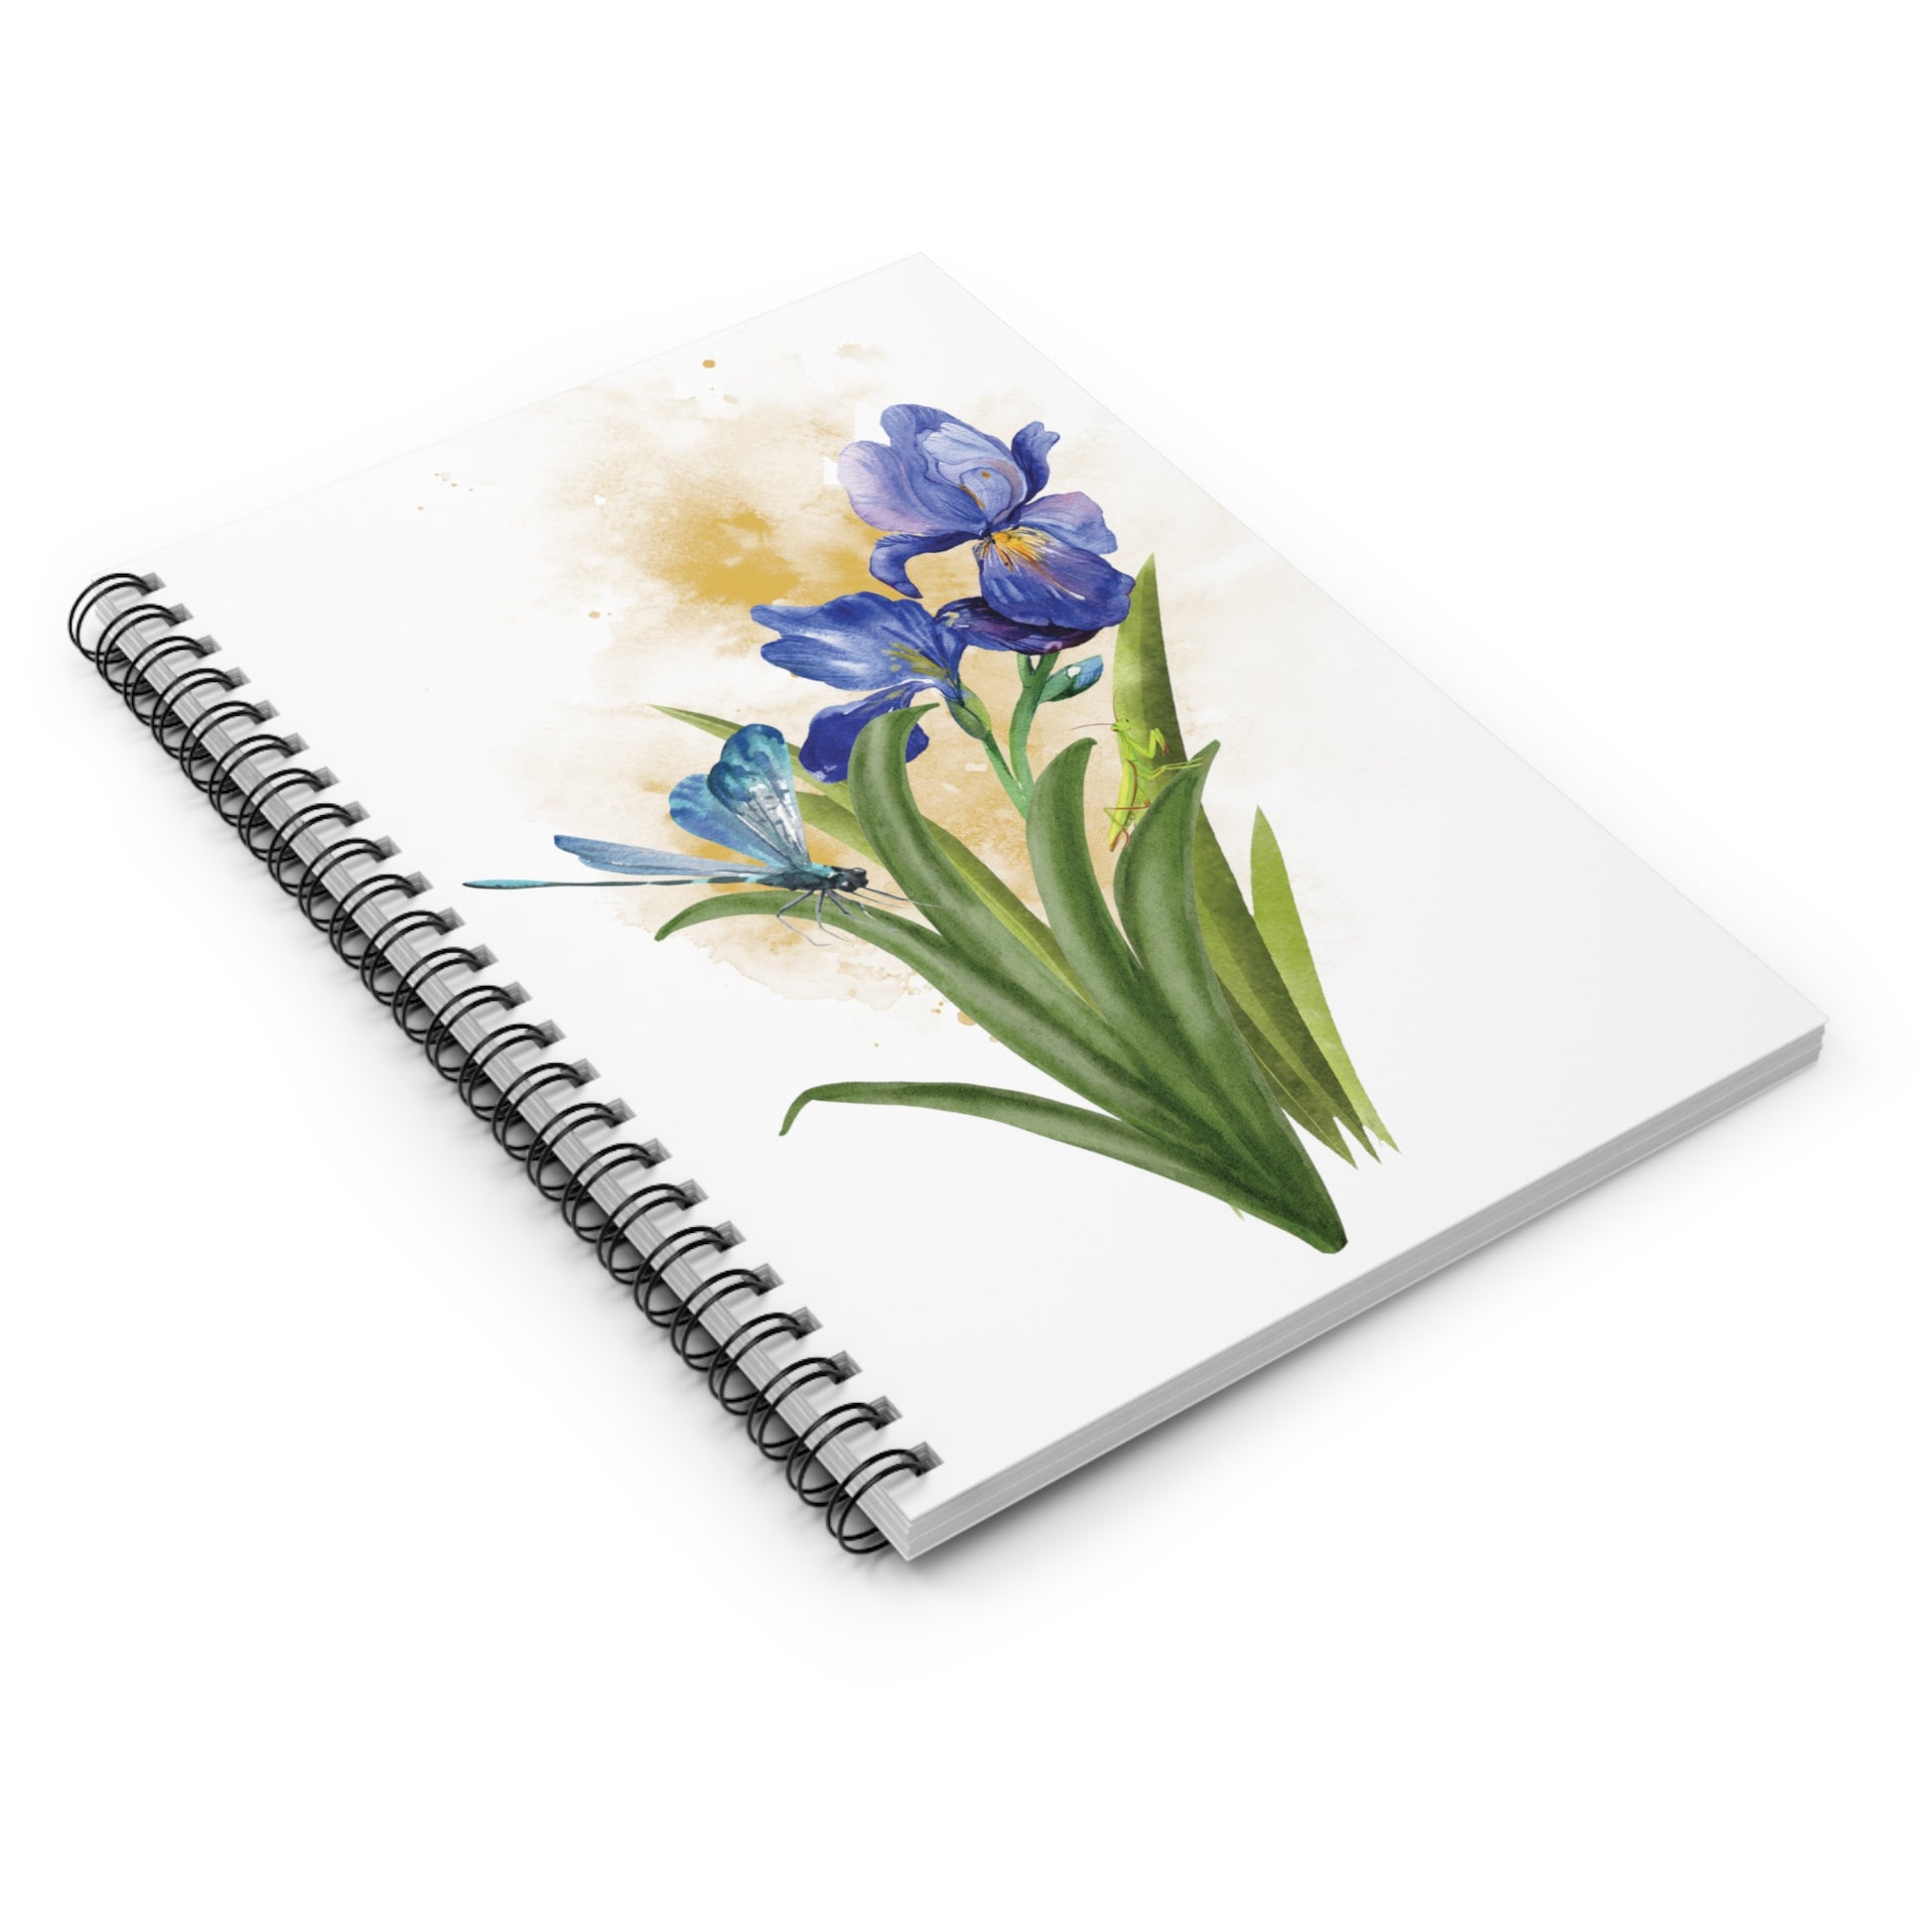 Iris Dragonfly: Spiral Notebook - Log Books - Journals - Diaries - and More Custom Printed by TheGlassyLass